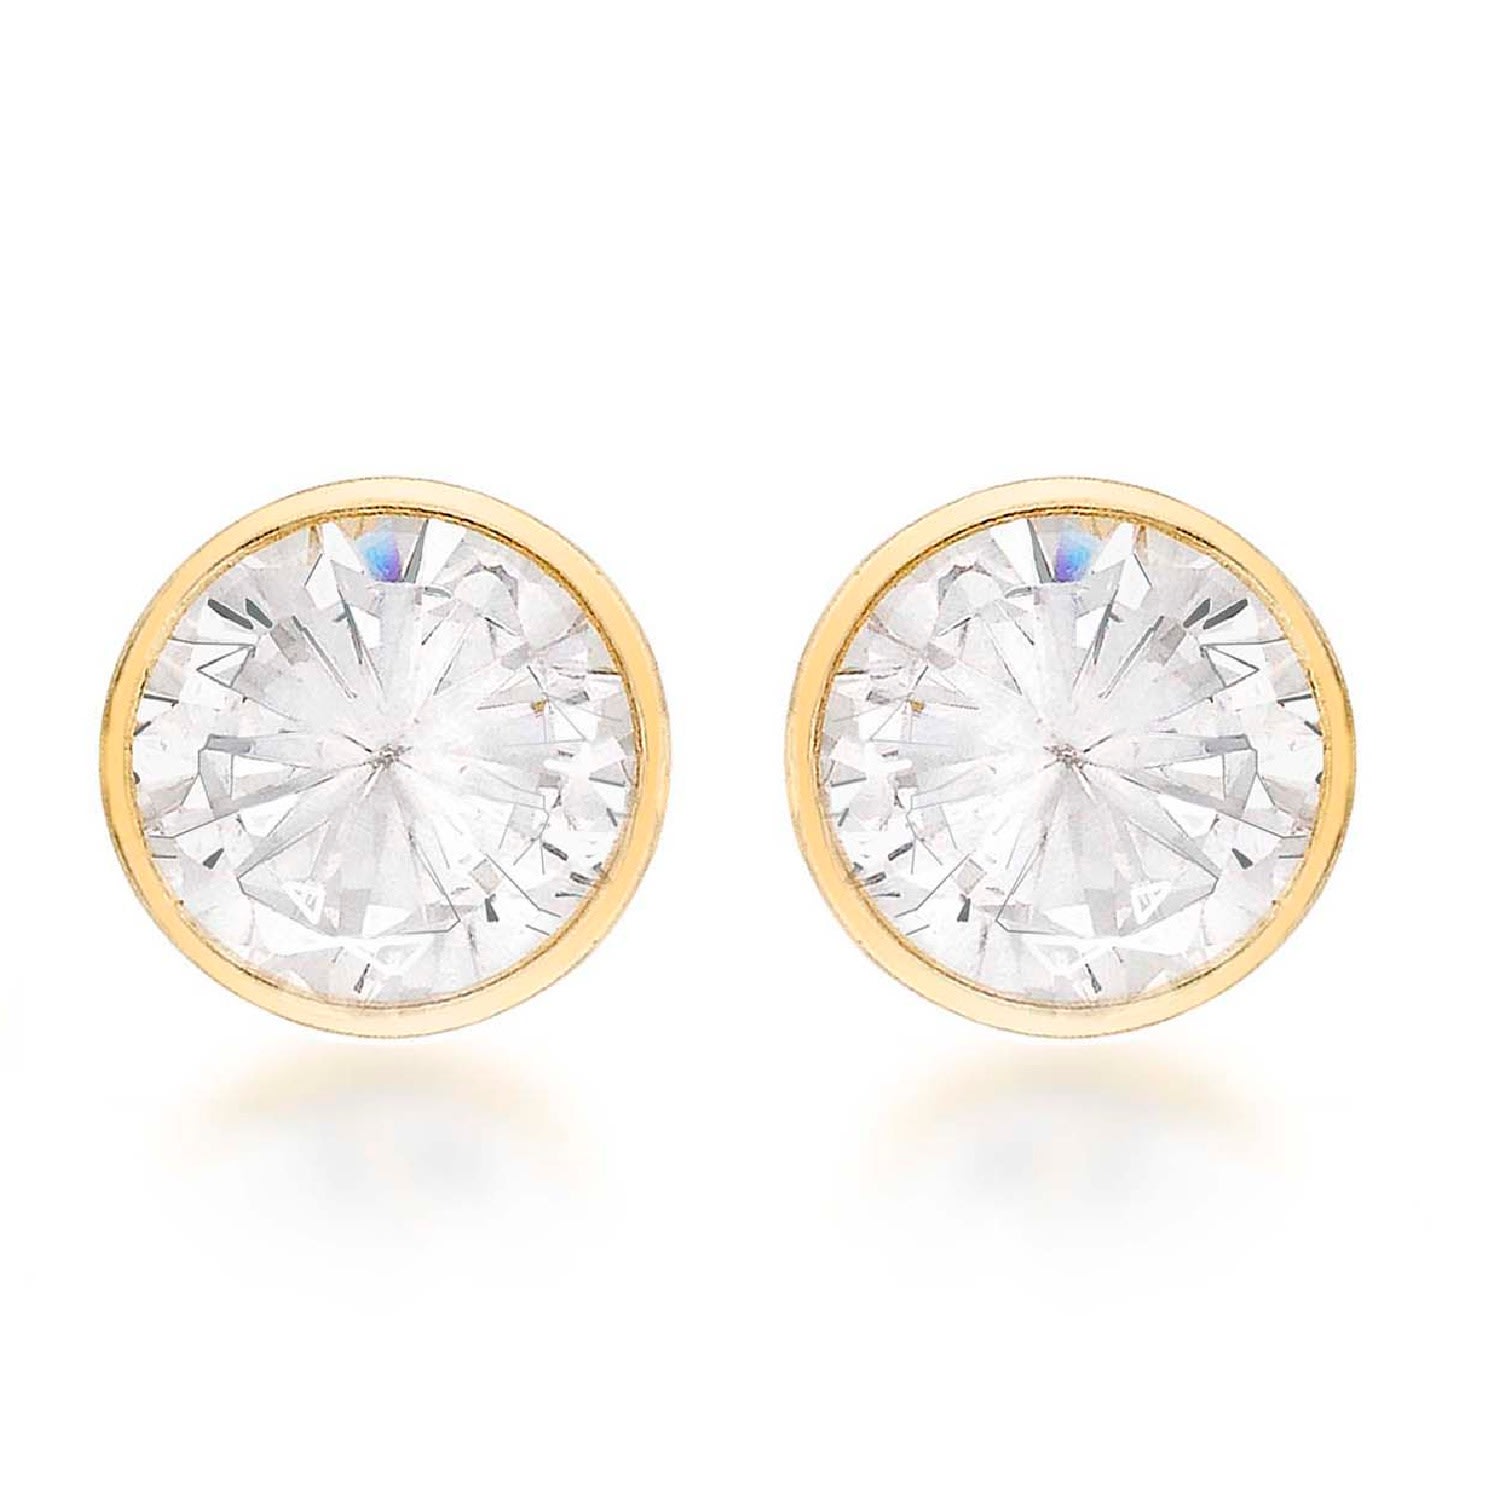 Posh Totty Designs Women's Round Gold Stud Earrings With Cubic Zirconia